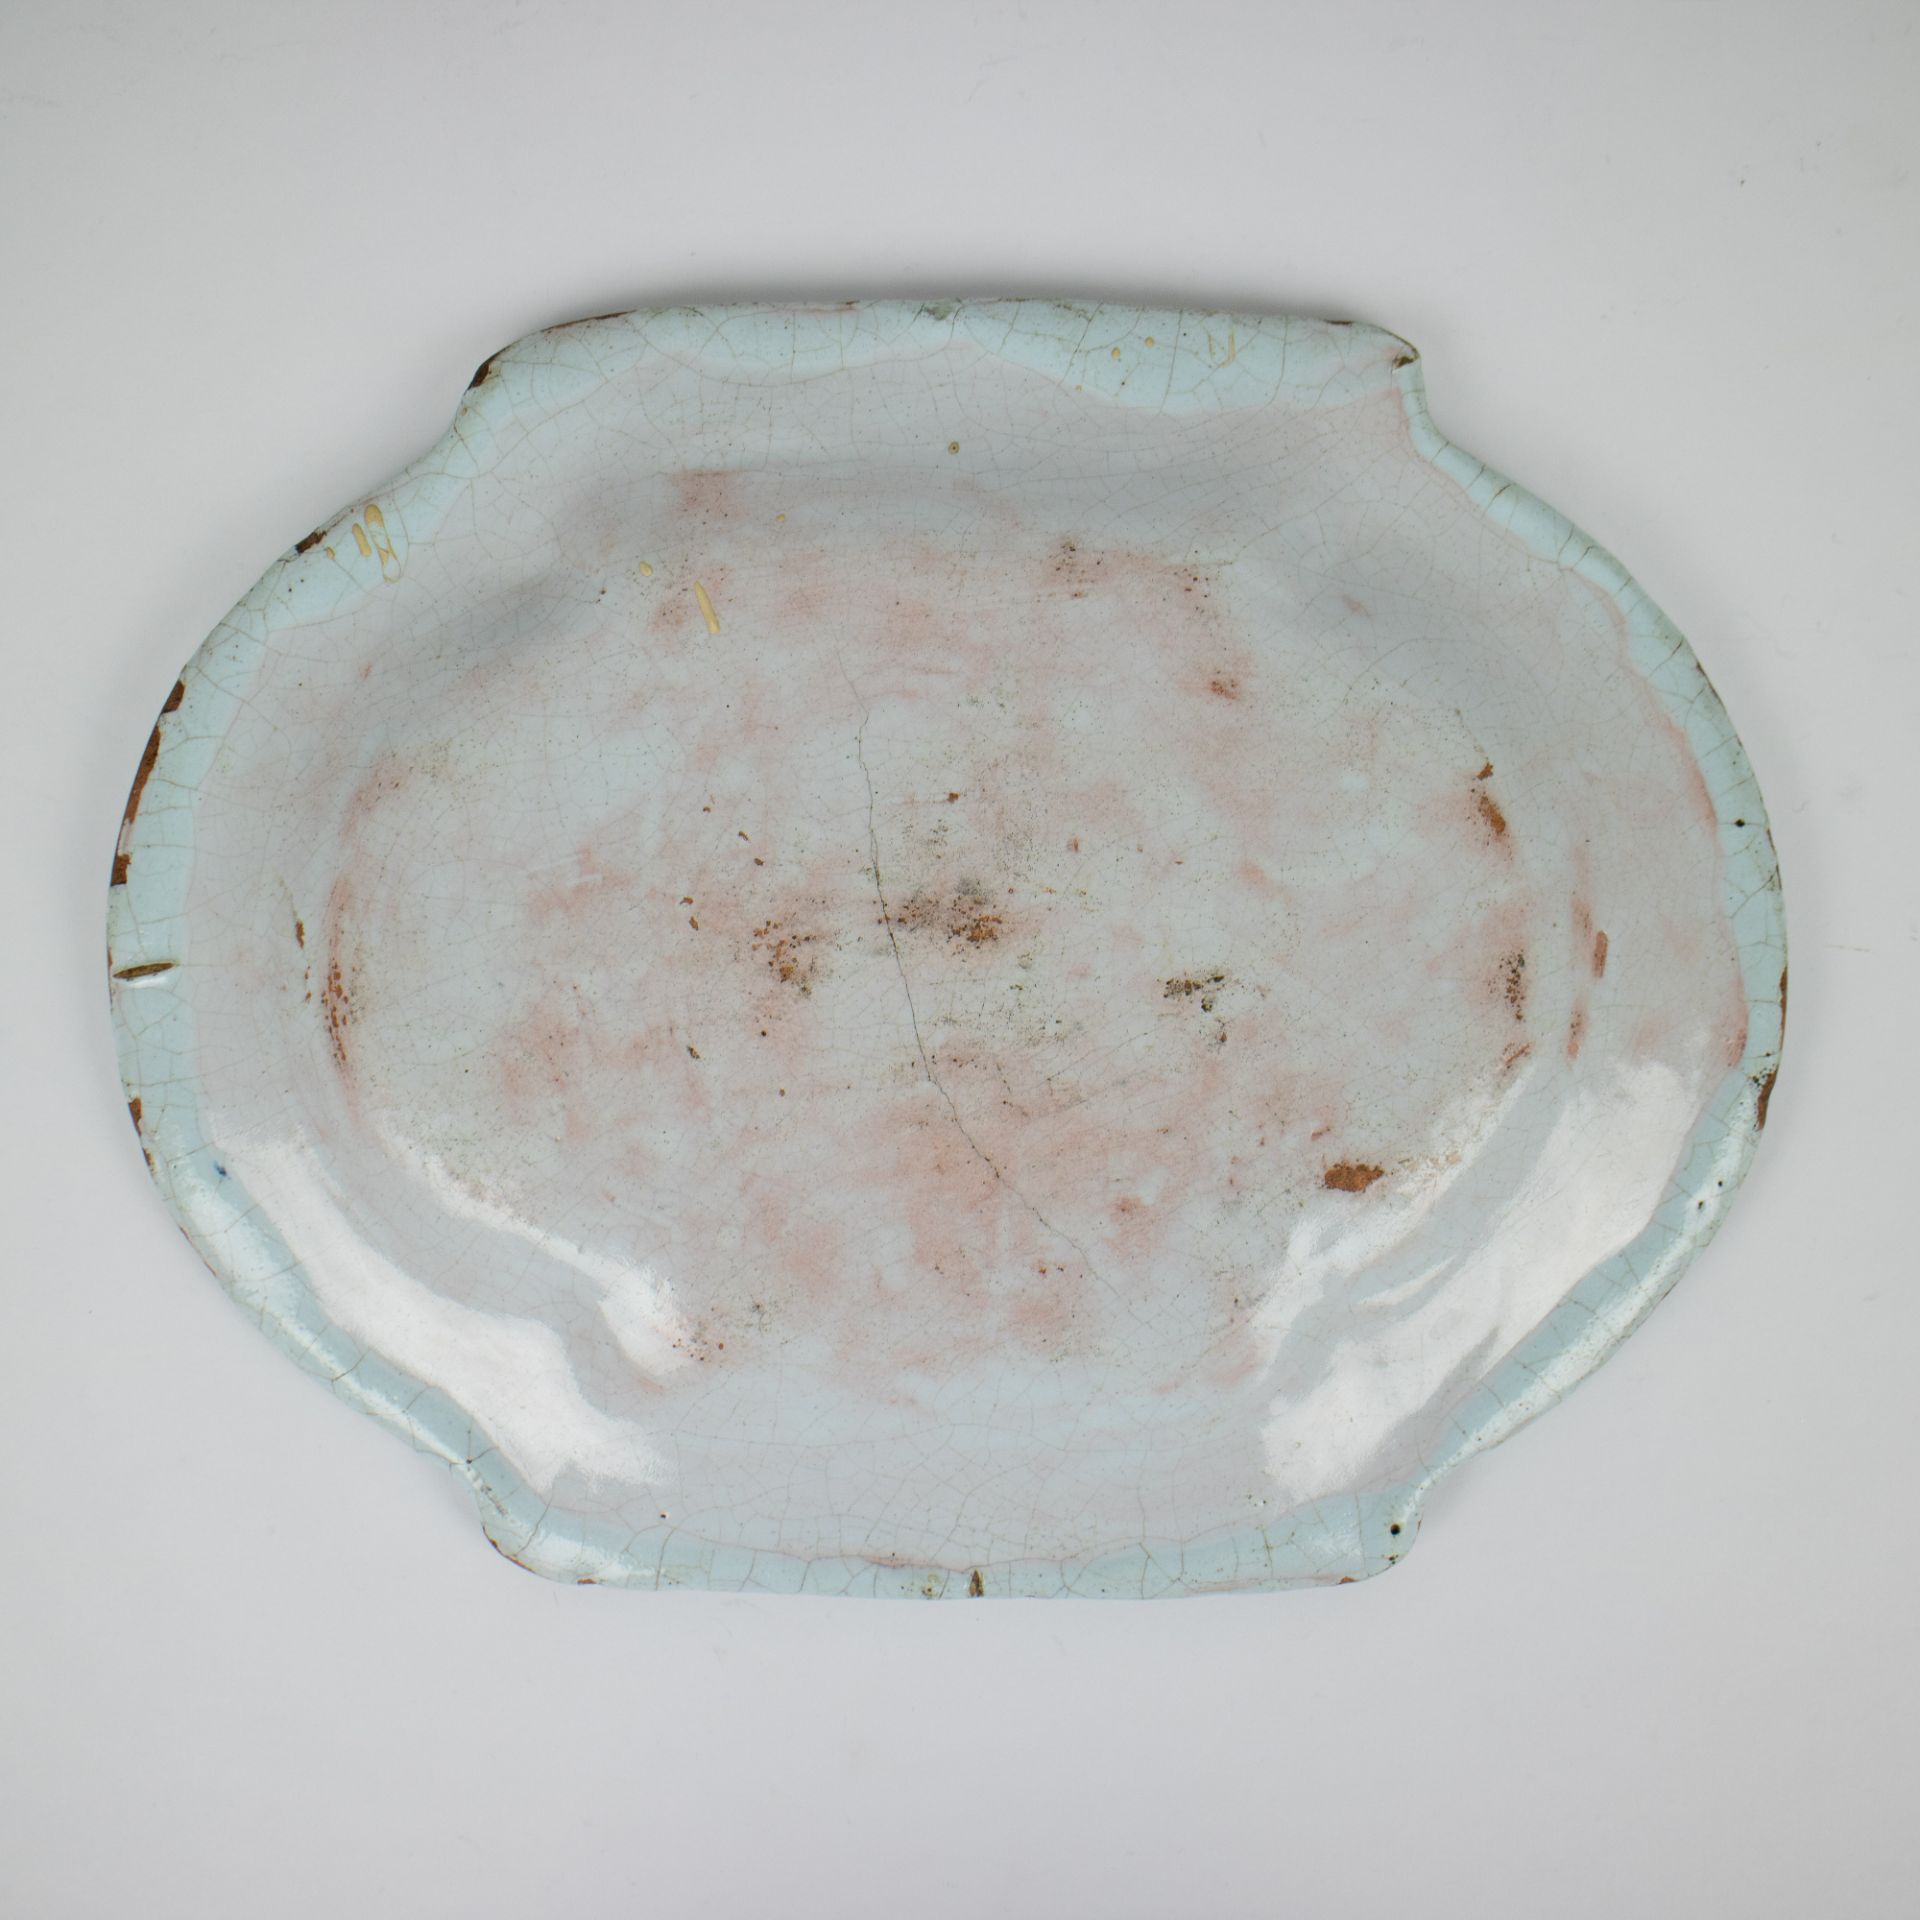 Faience Rouen, revolution plate, jug 18th - 19th century - Image 3 of 12